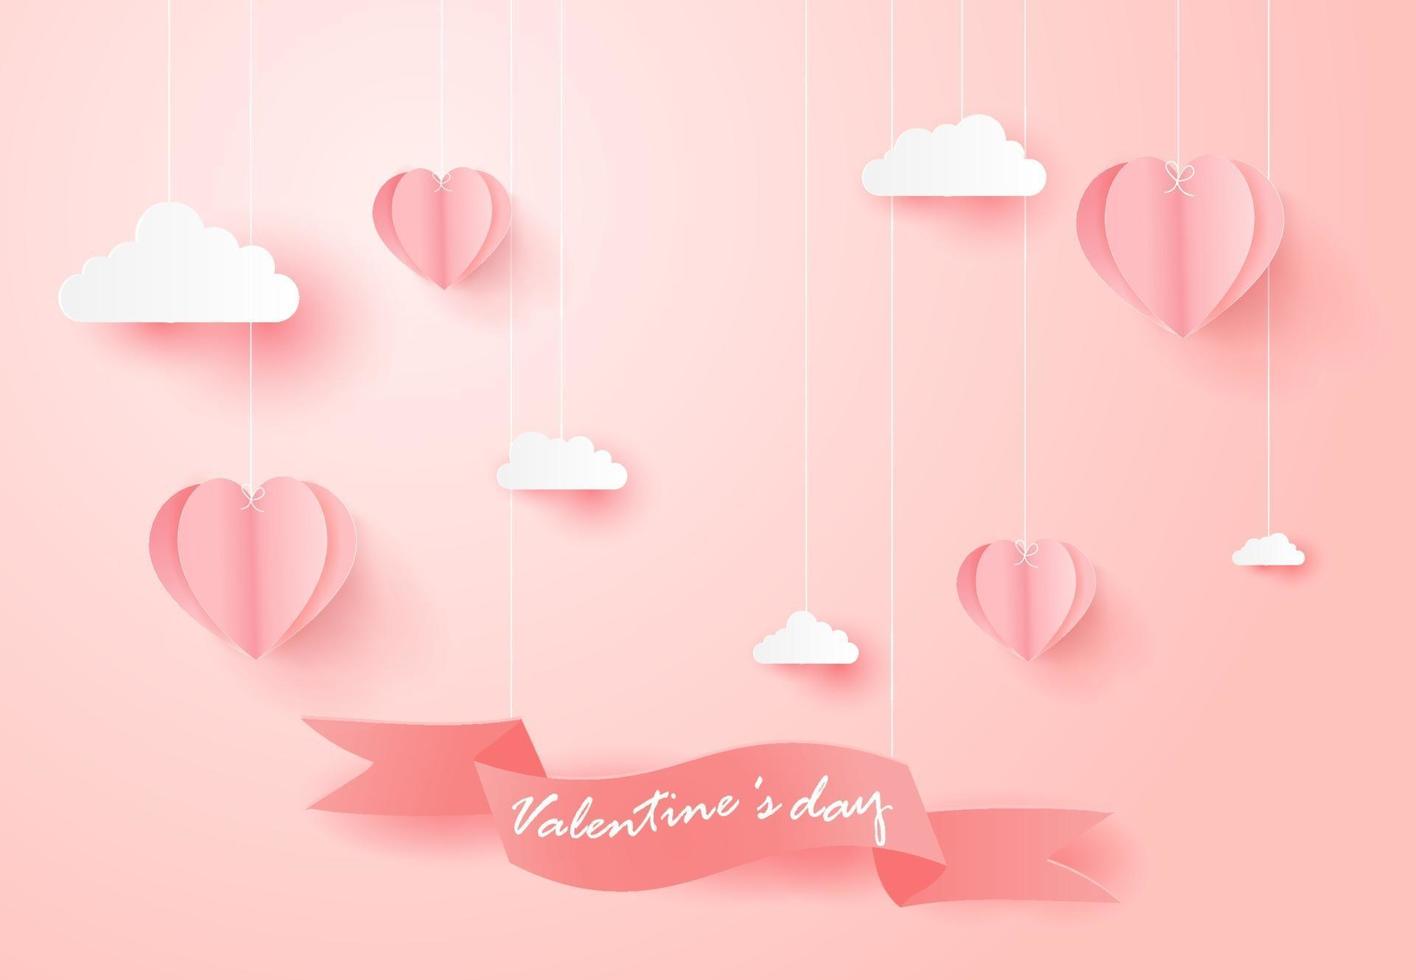 Happy Valentines Day greeting card with Heart Shaped Balloons on pink background. vector